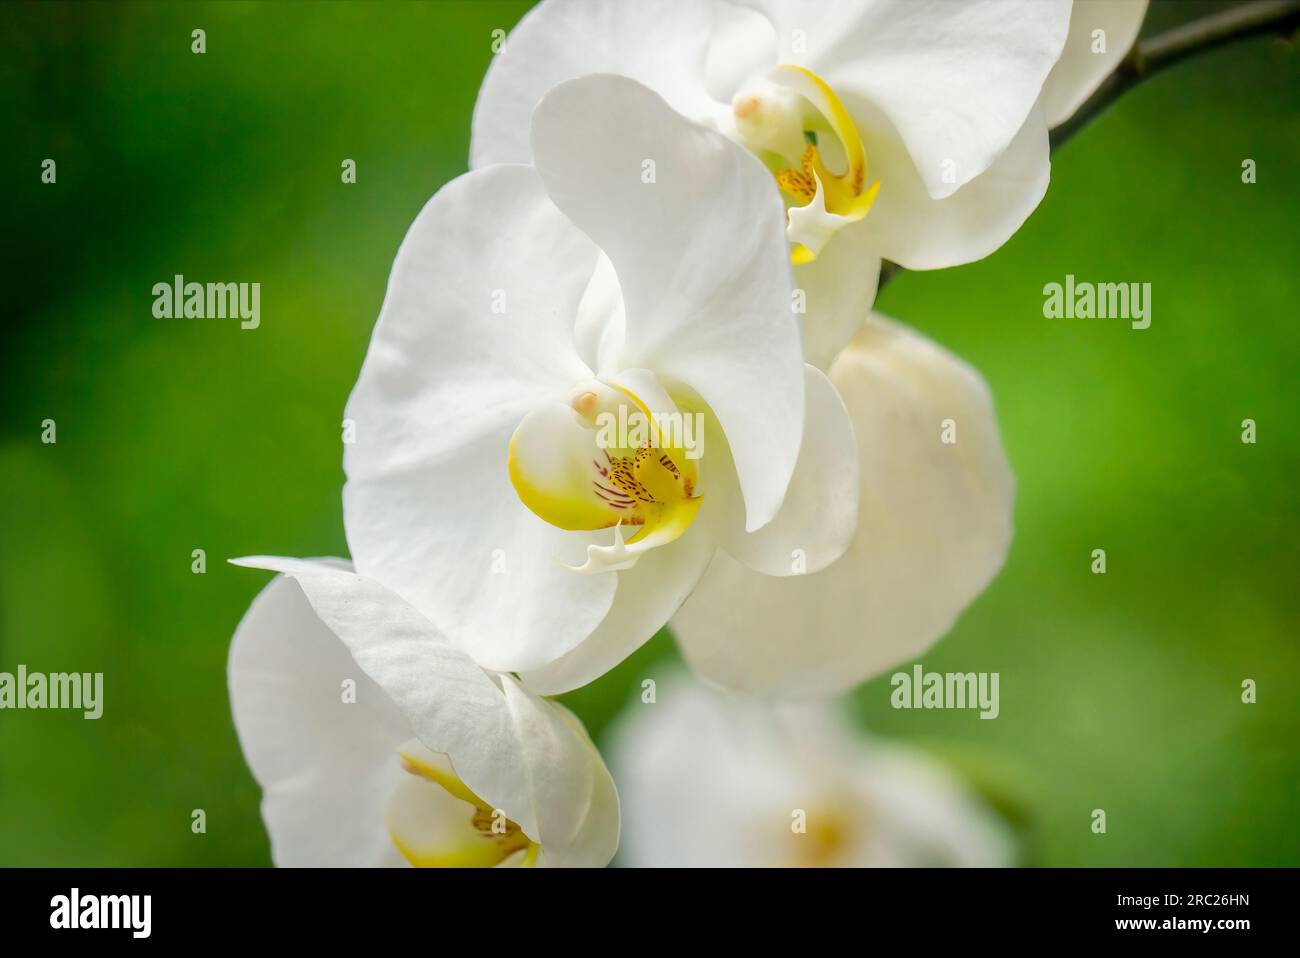 The soft delicate beauty of a white Phalaenopsis orchid. Selective focus on the center yellow speckled labellum, or lip. Stock Photo